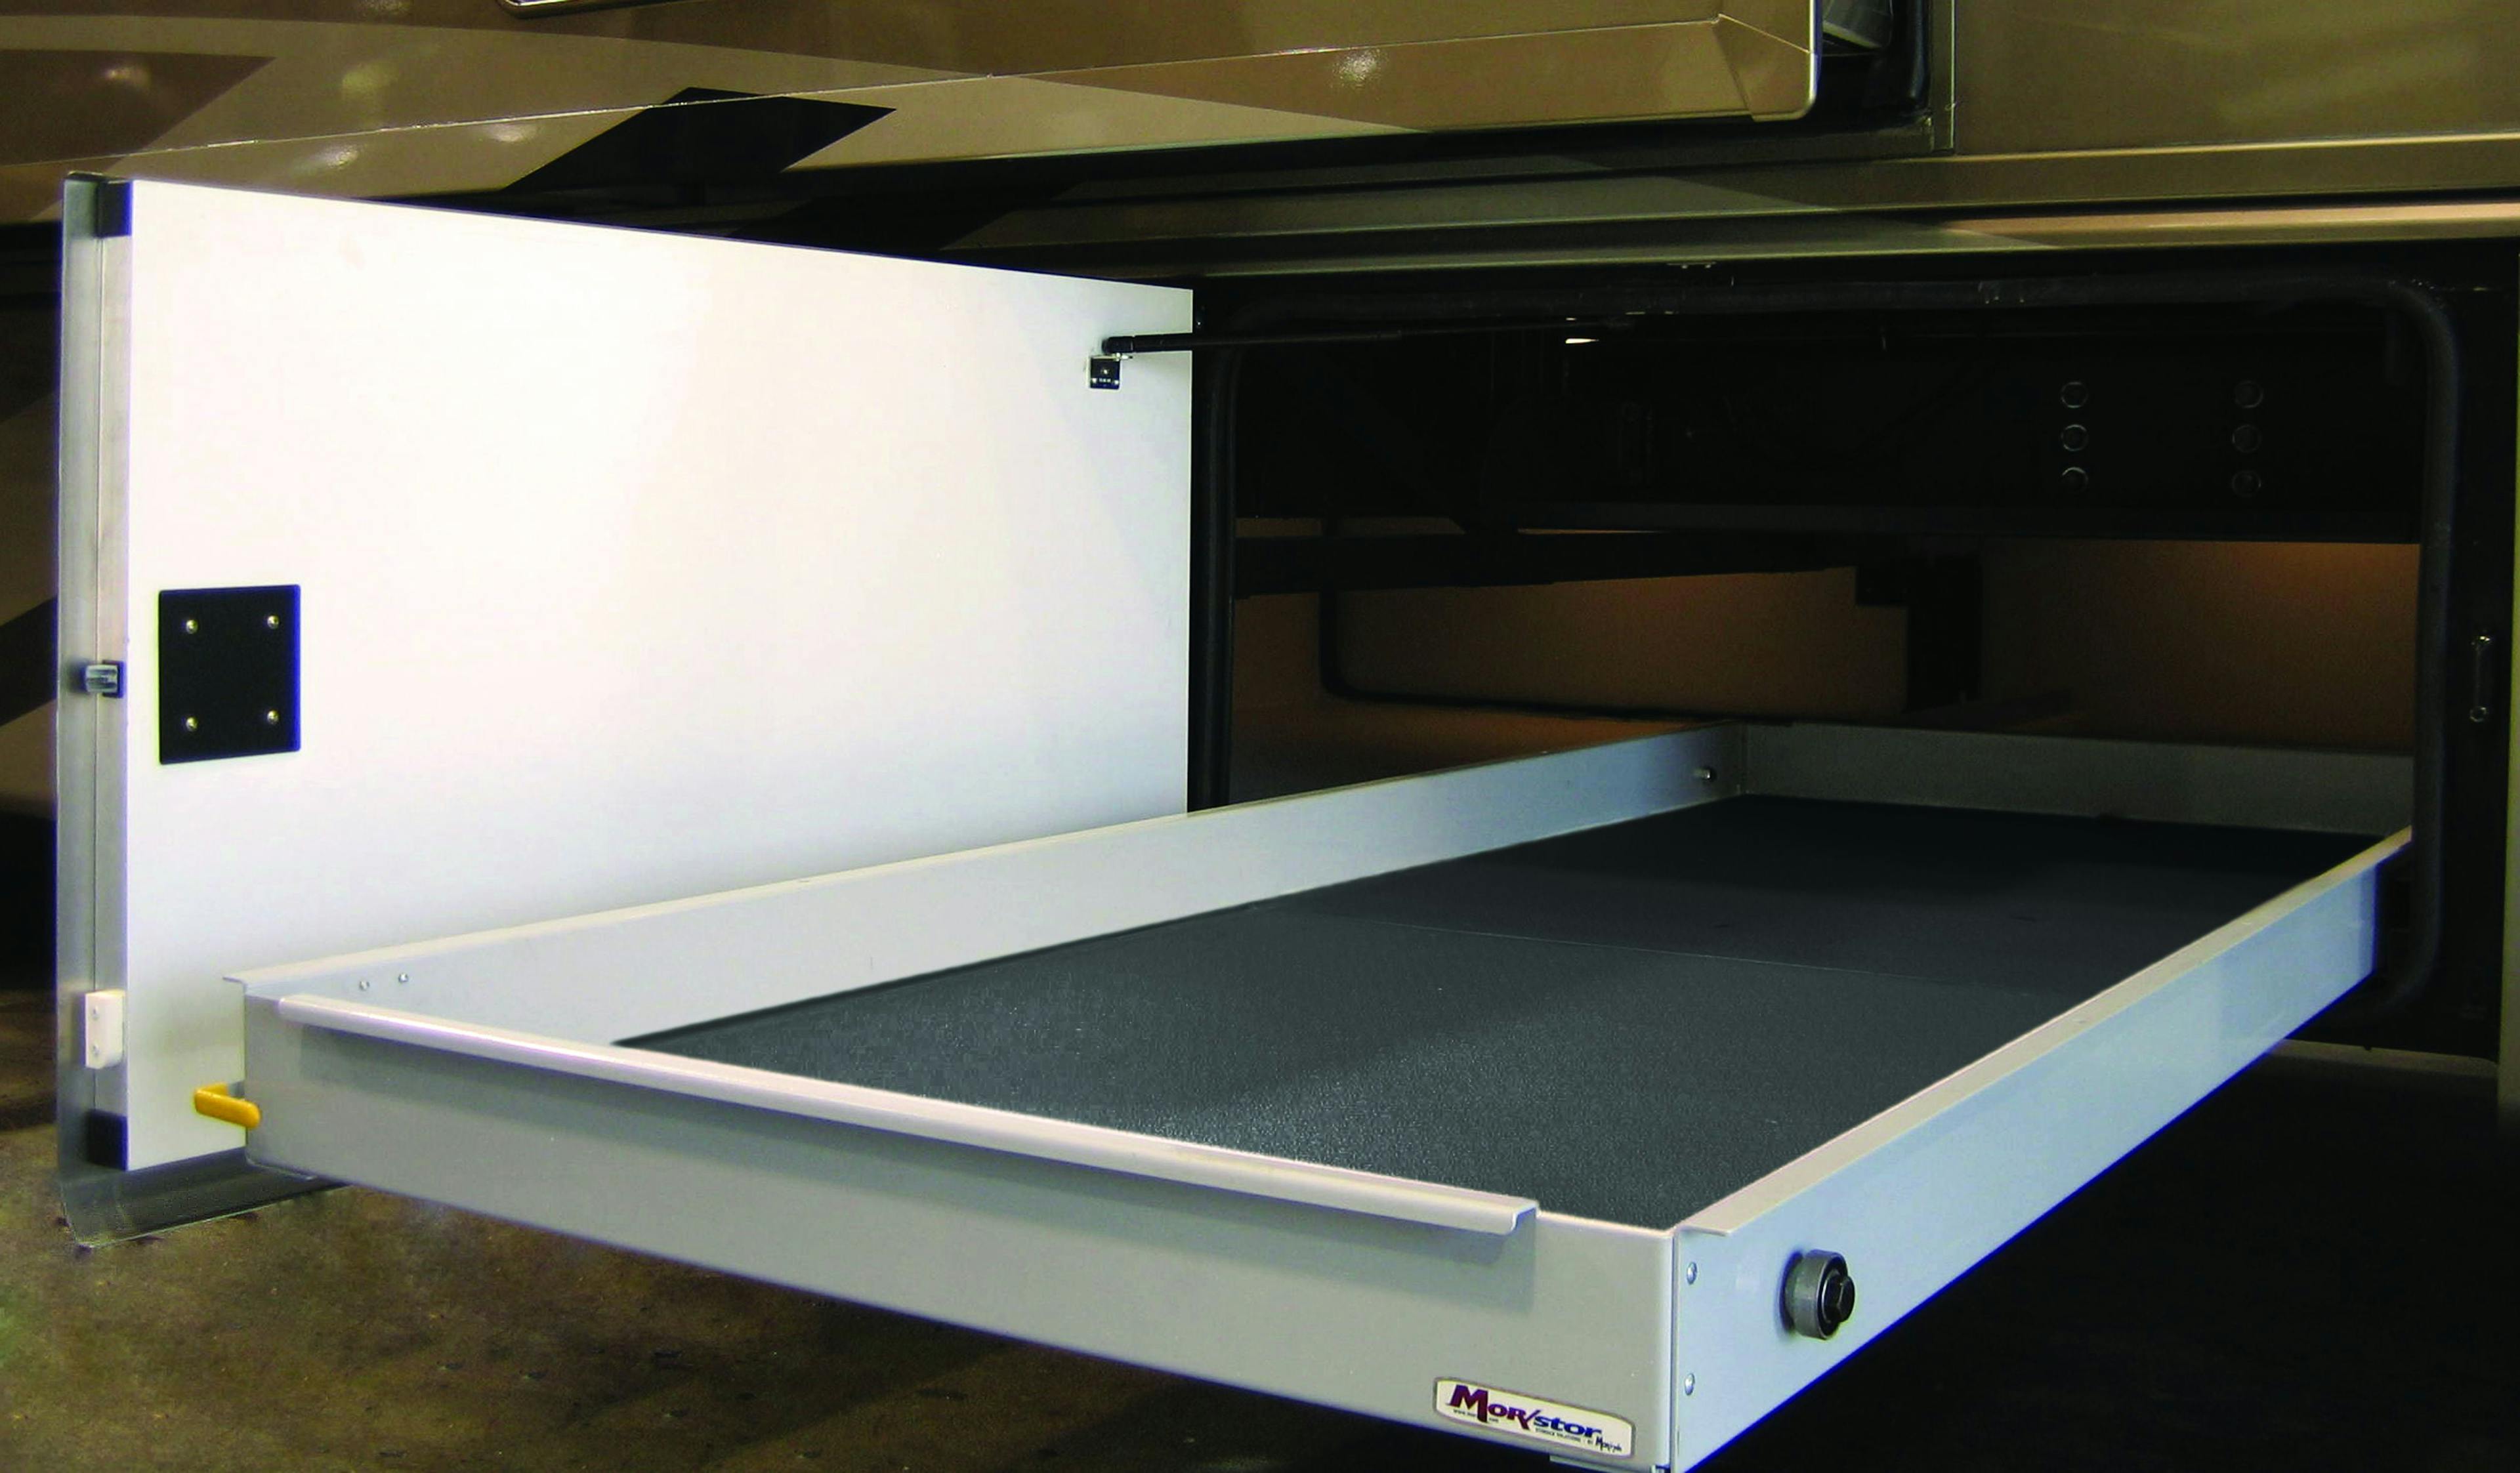 Roller Bearing 48" Dual-Access Cargo Tray with Powder Coat Finish